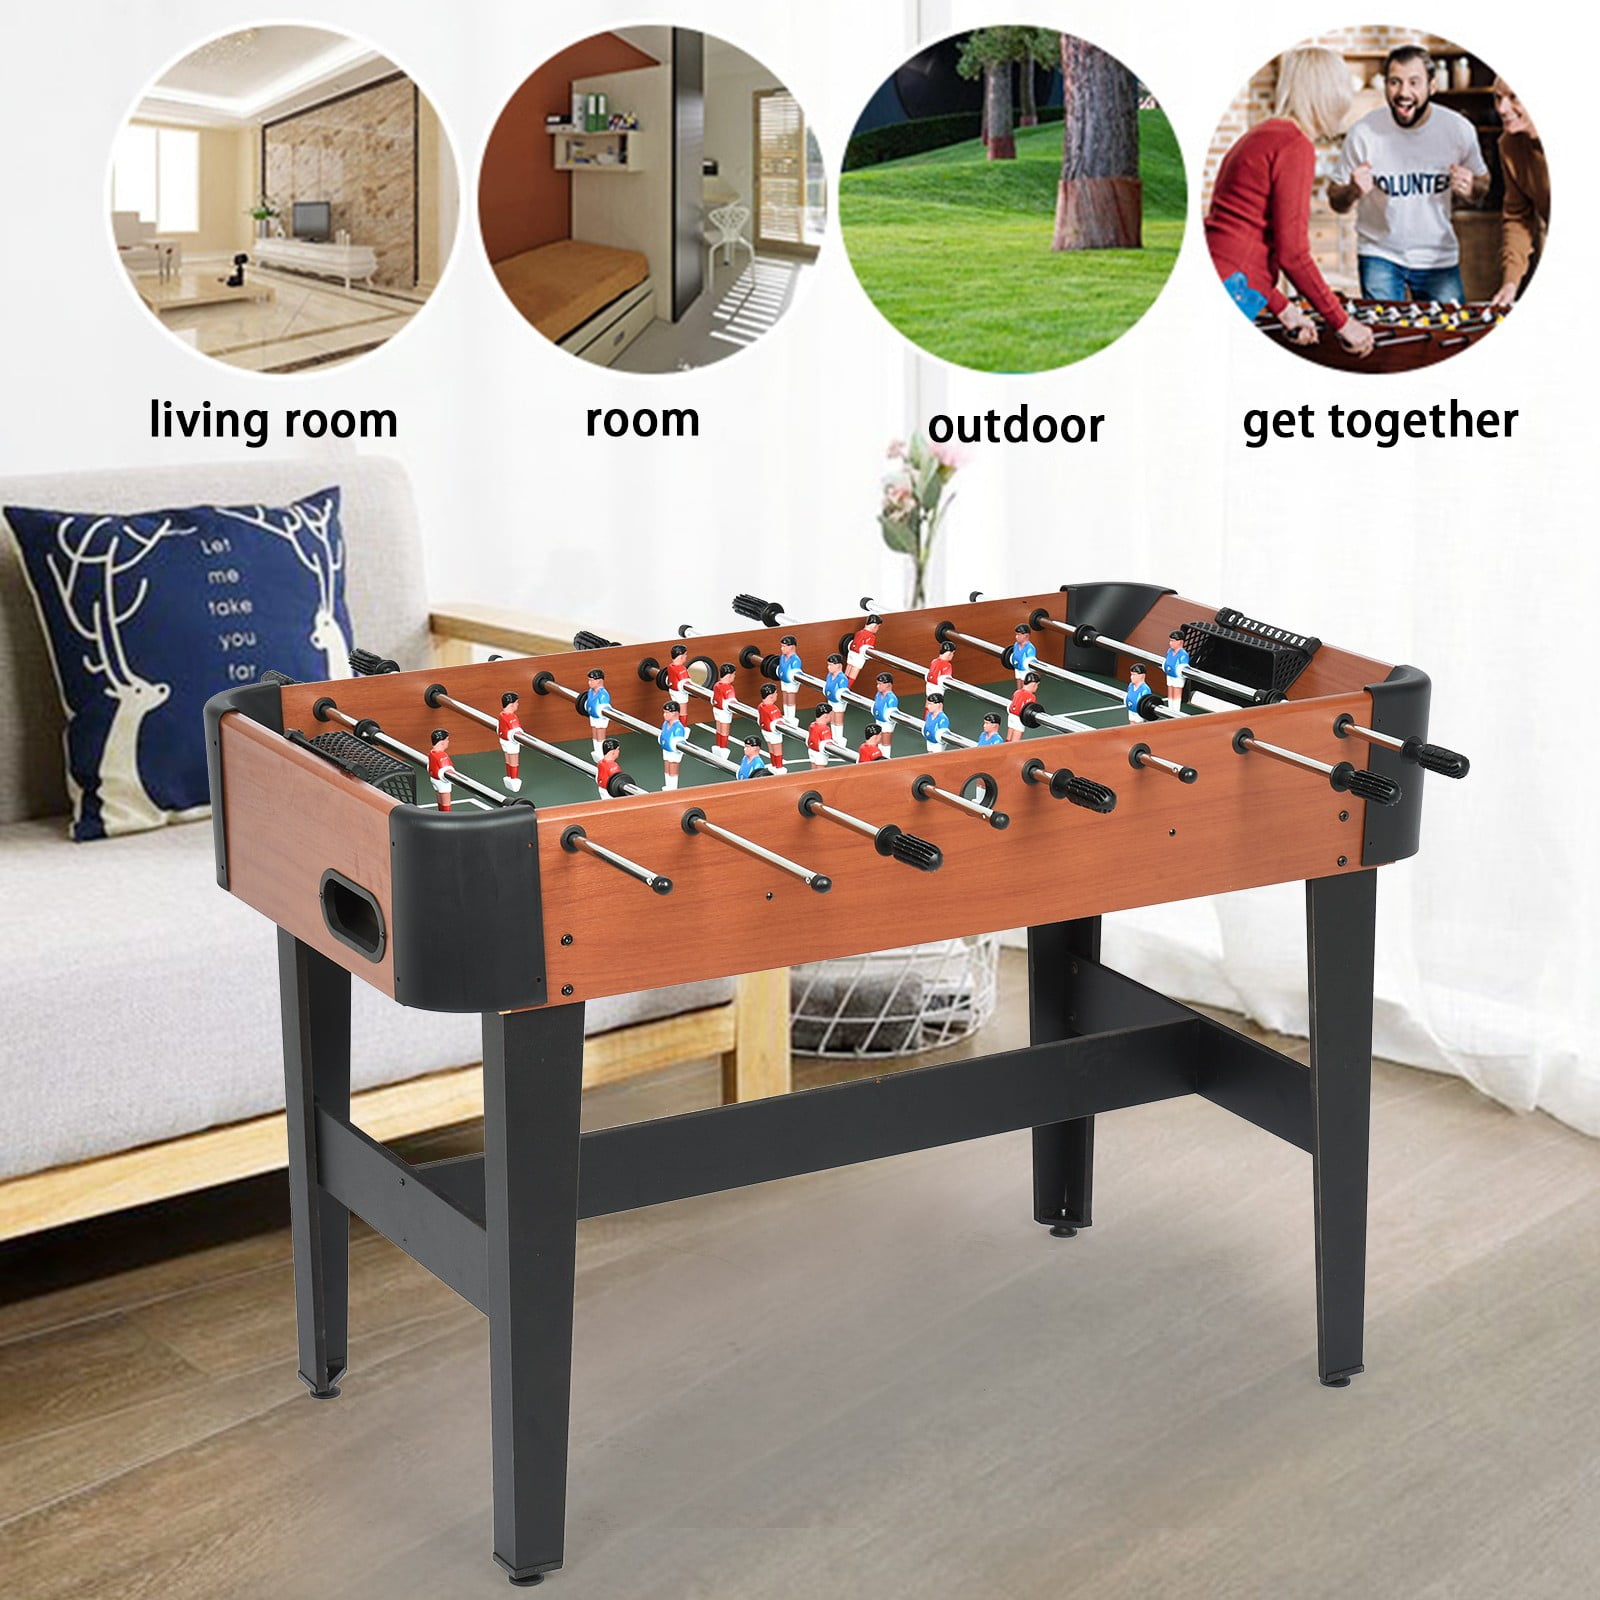 Details about   Portable Soccer Table Foosball Table For Kids Adults Parties Bars 